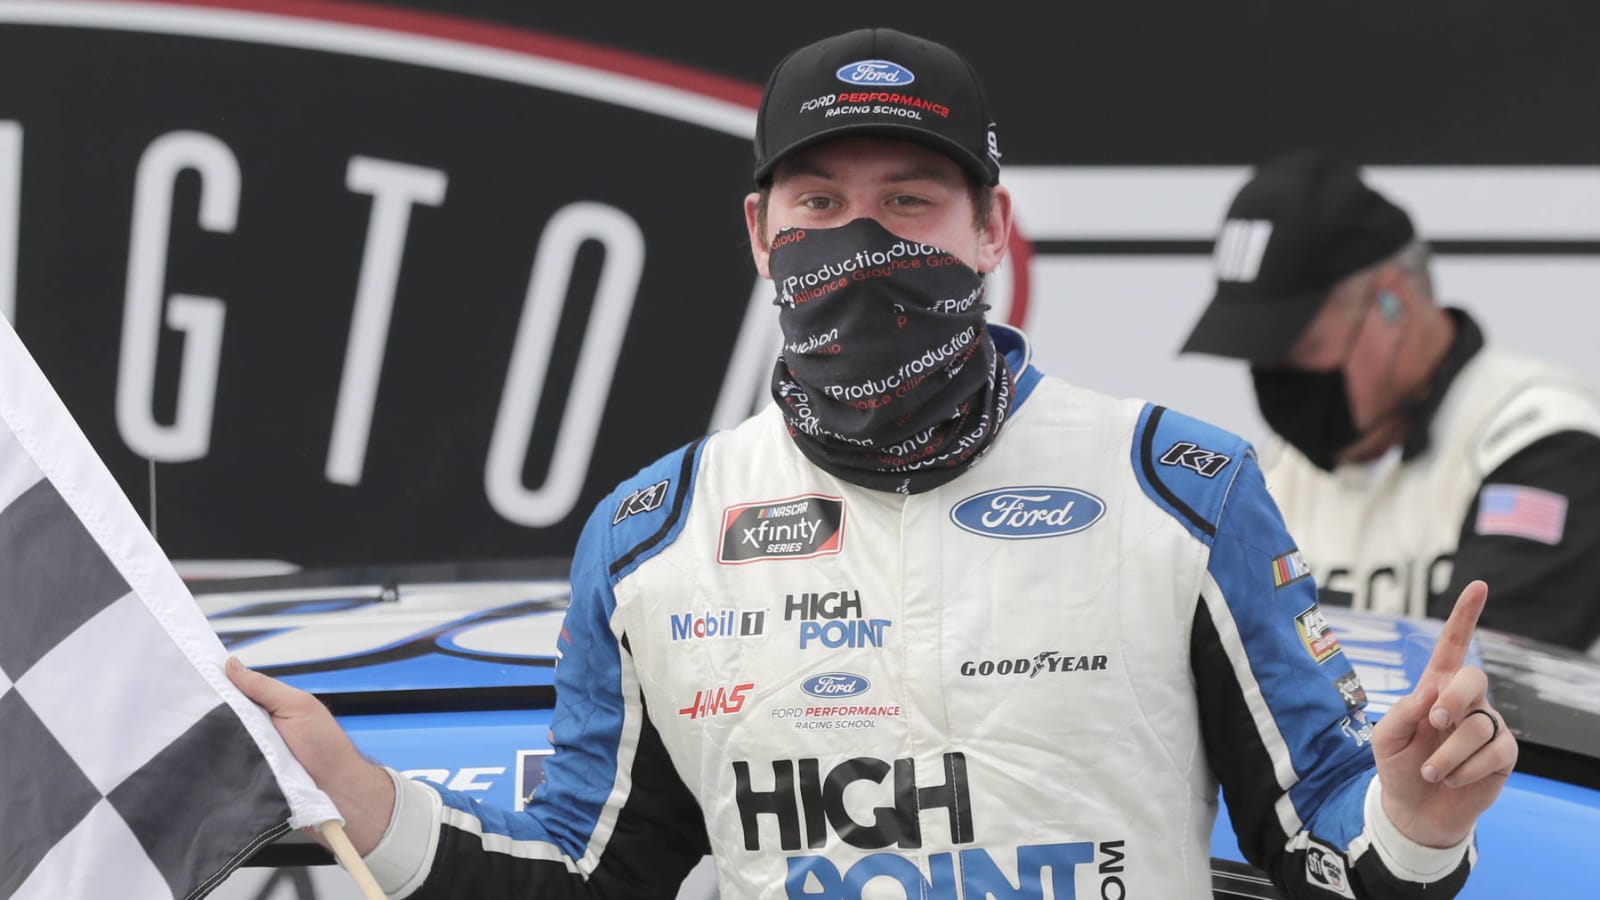 Chase Briscoe wins Xfinity Series race days after wife's miscarriage